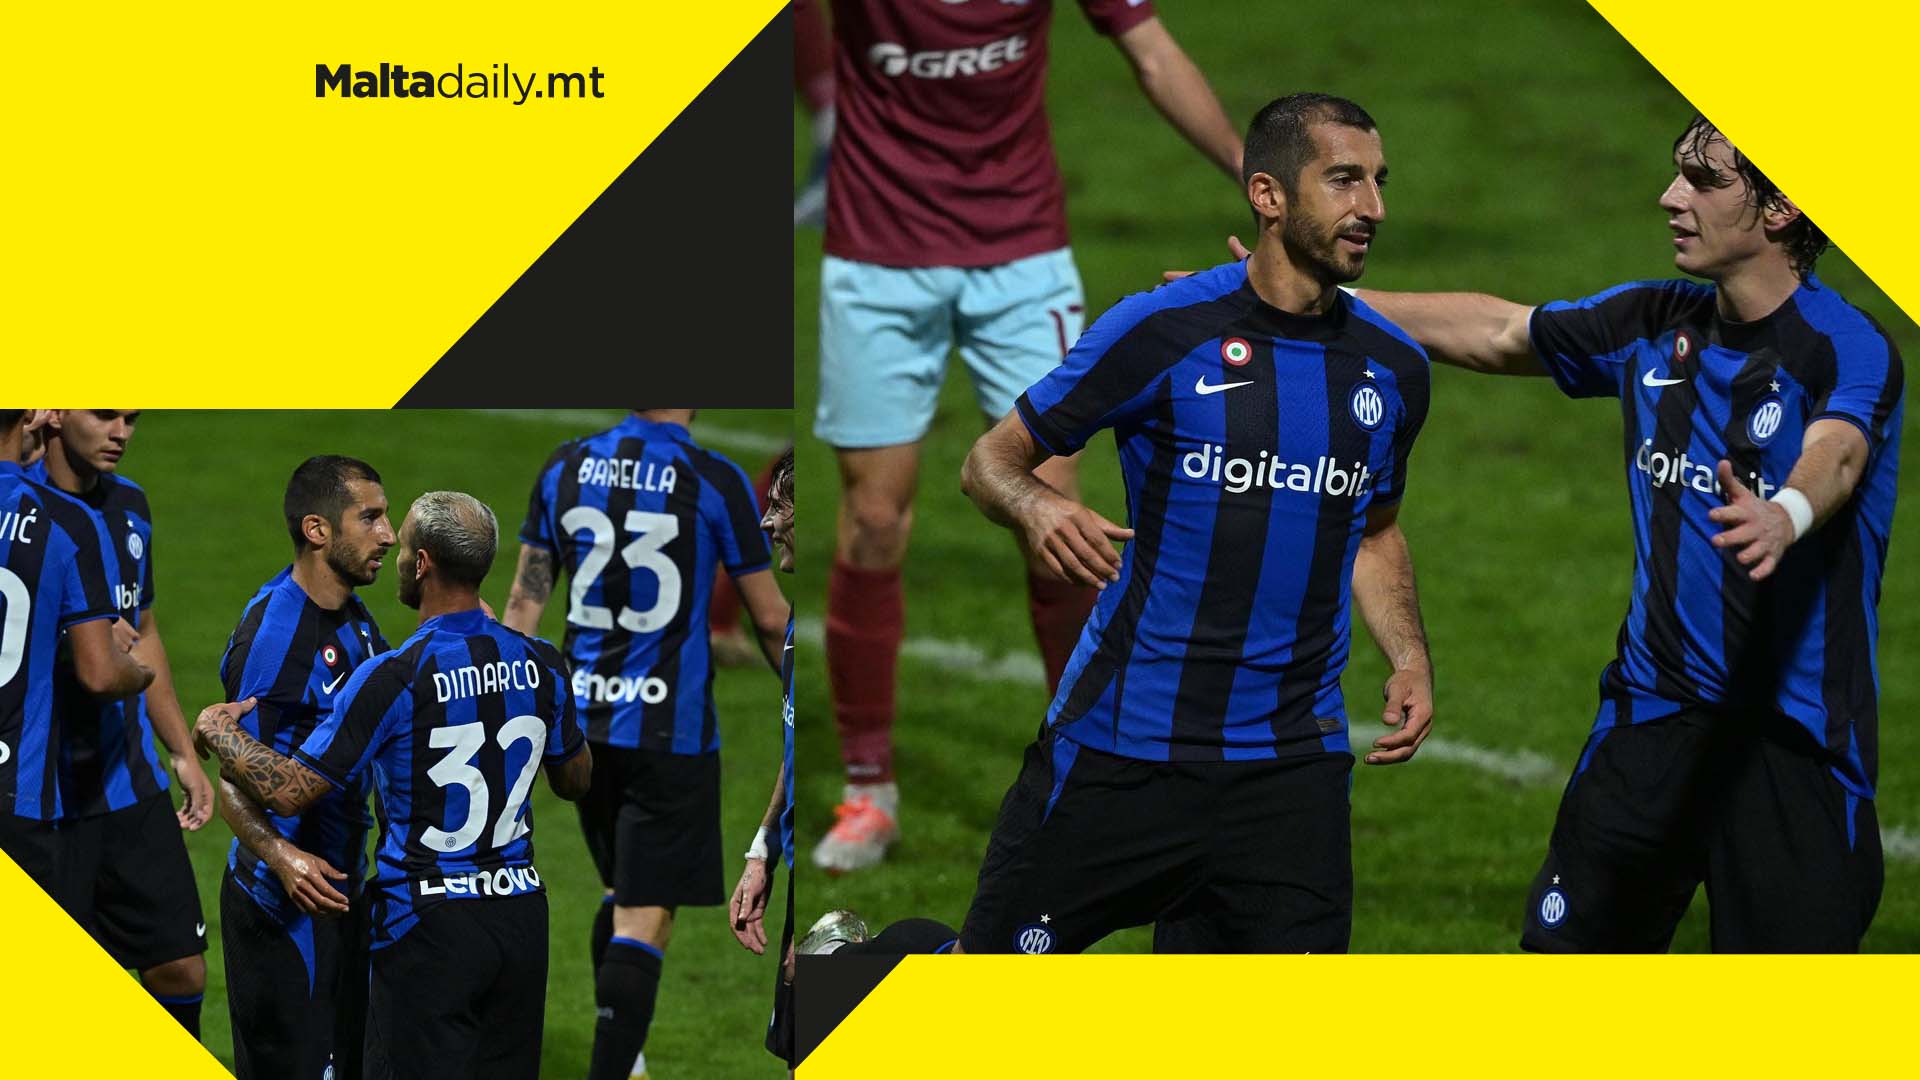 Inter secure comfortable 6-1 victory over Gżira United in first Malta friendly